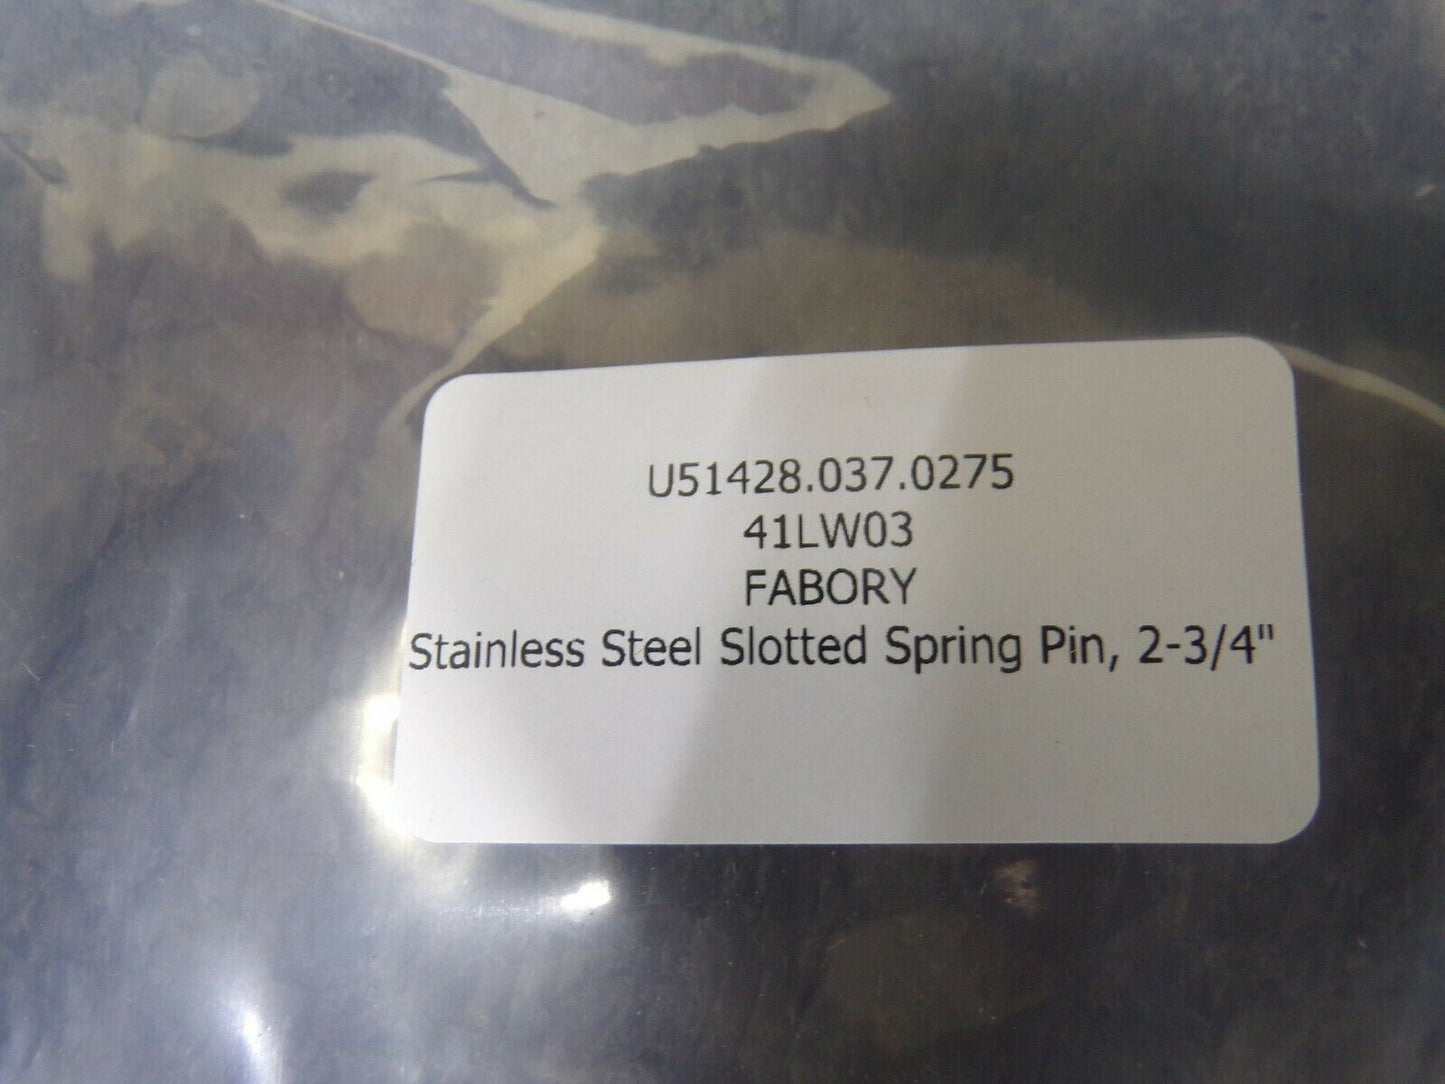 (10) FABORY Stainless Steel Slotted Spring Pin, 3/8" X 2-3/4" (183850730992-NBT33)